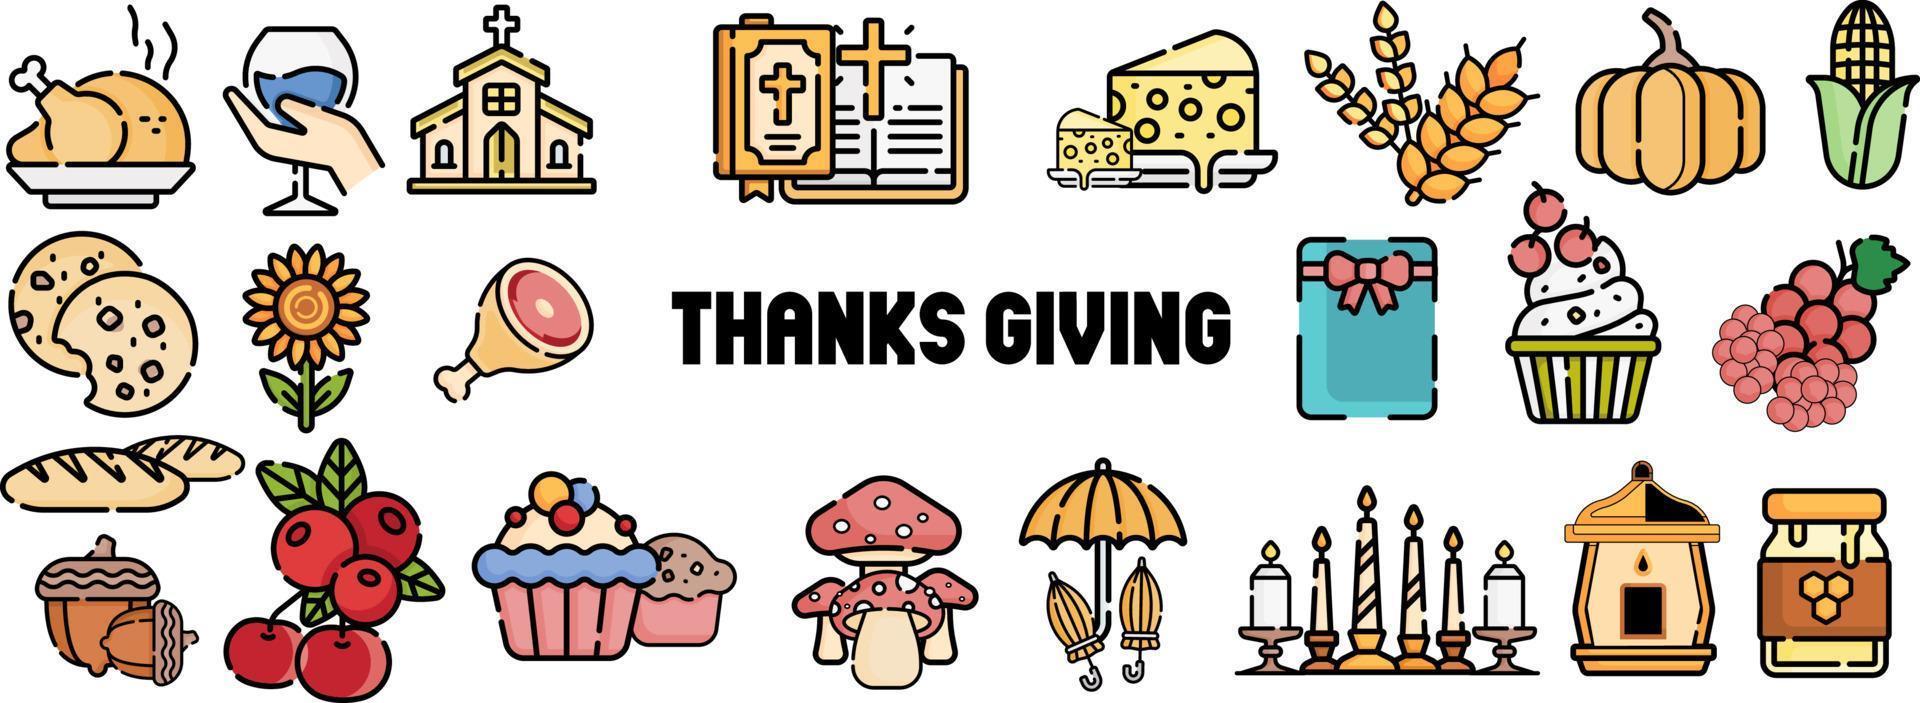 Thanksgiving icons. Big set of Thanksgiving icons. vector